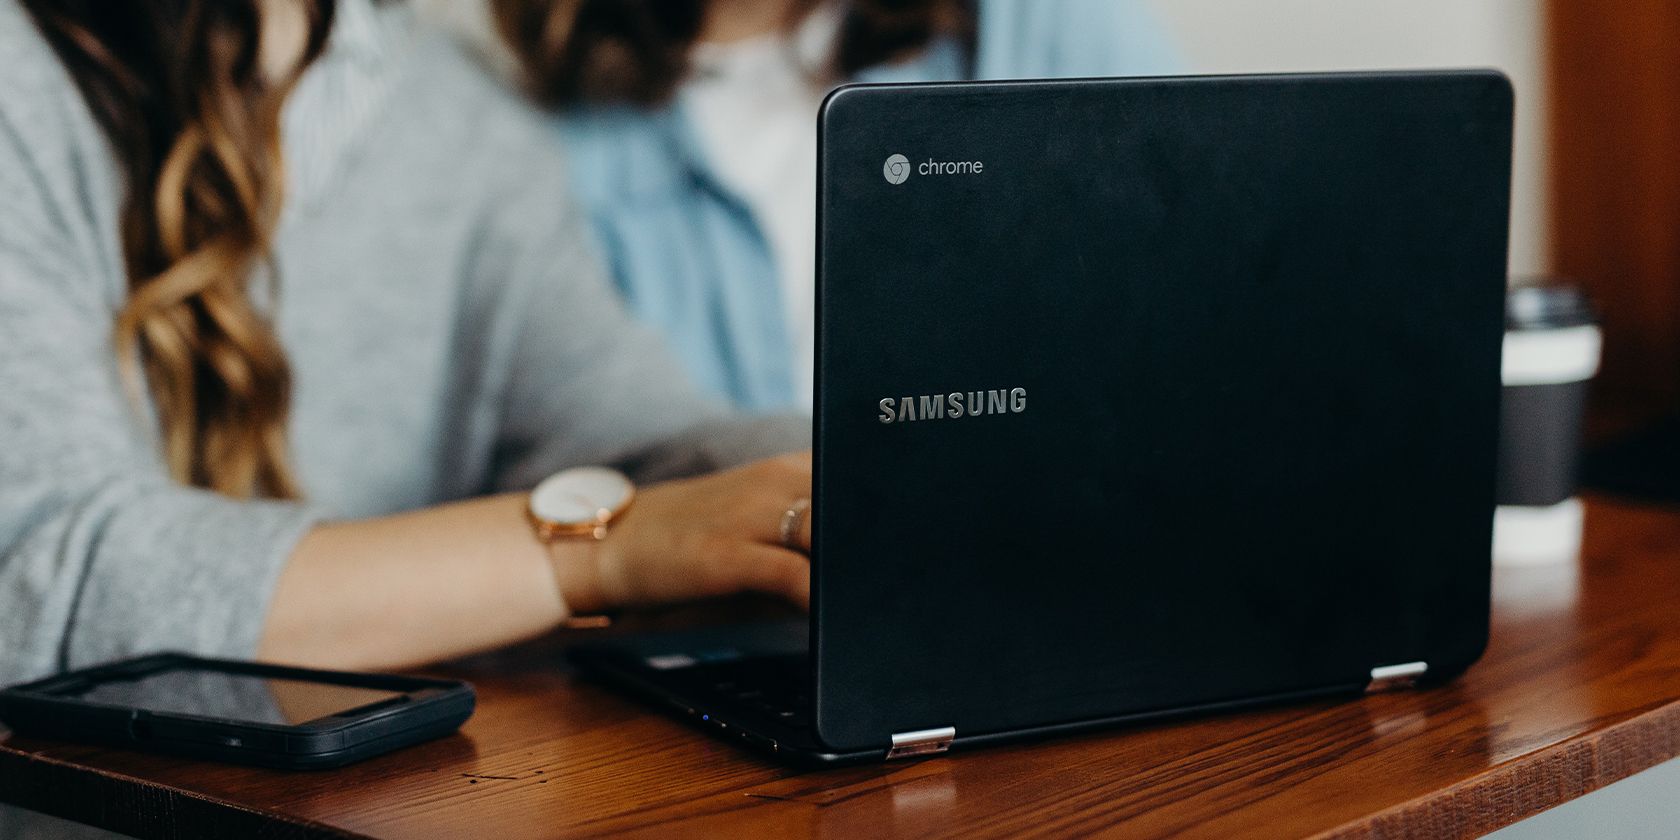 Samsung Chromebook on a desk being used on the go